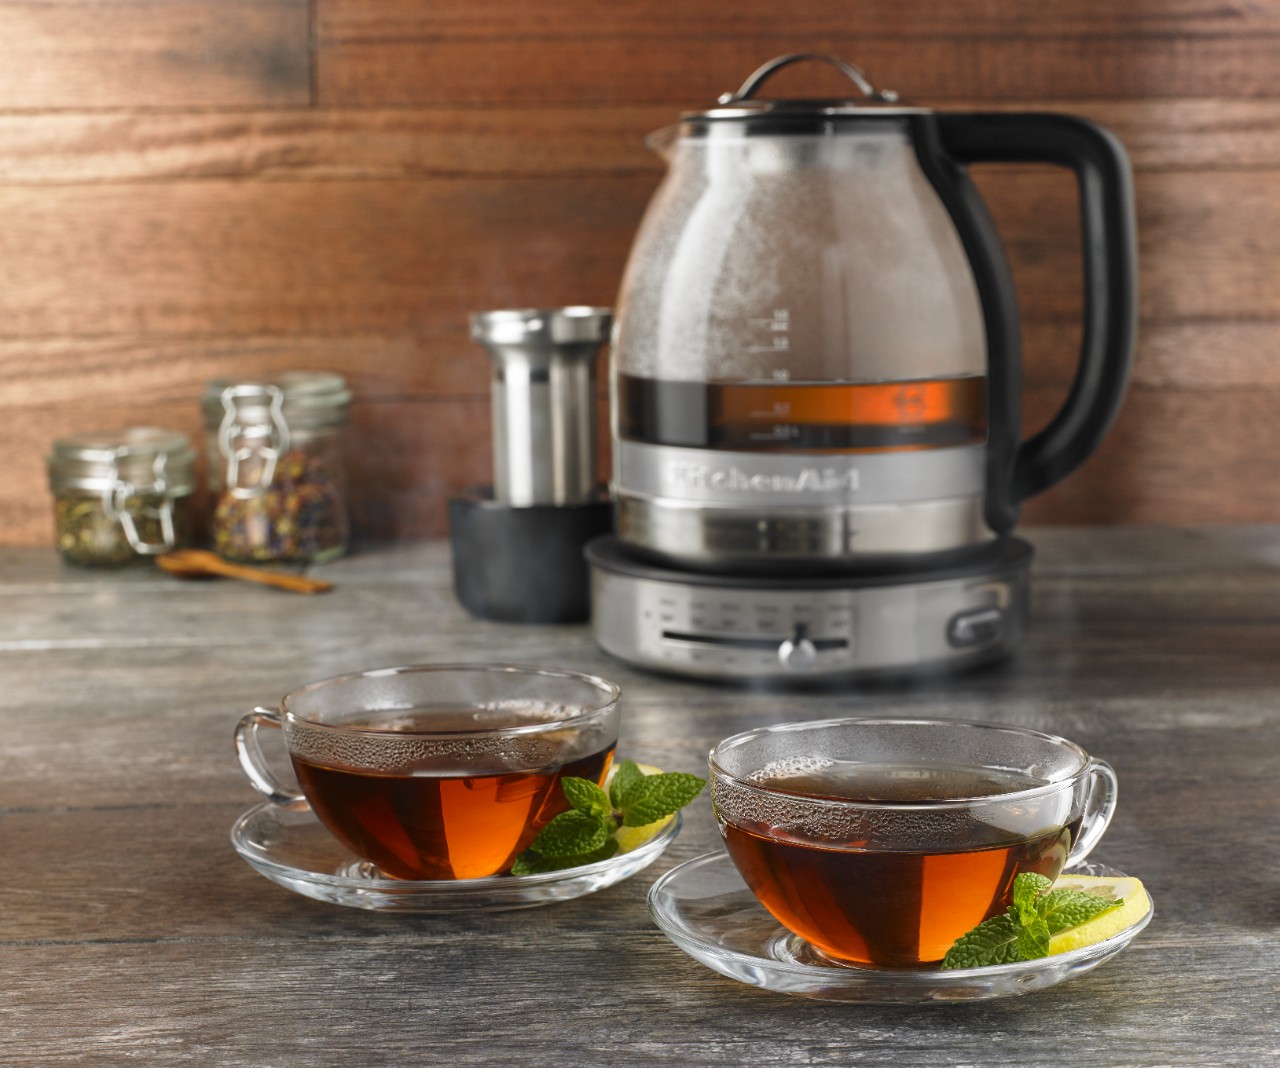 Heat water for tea, coffee and other beverages with an electric kettle.